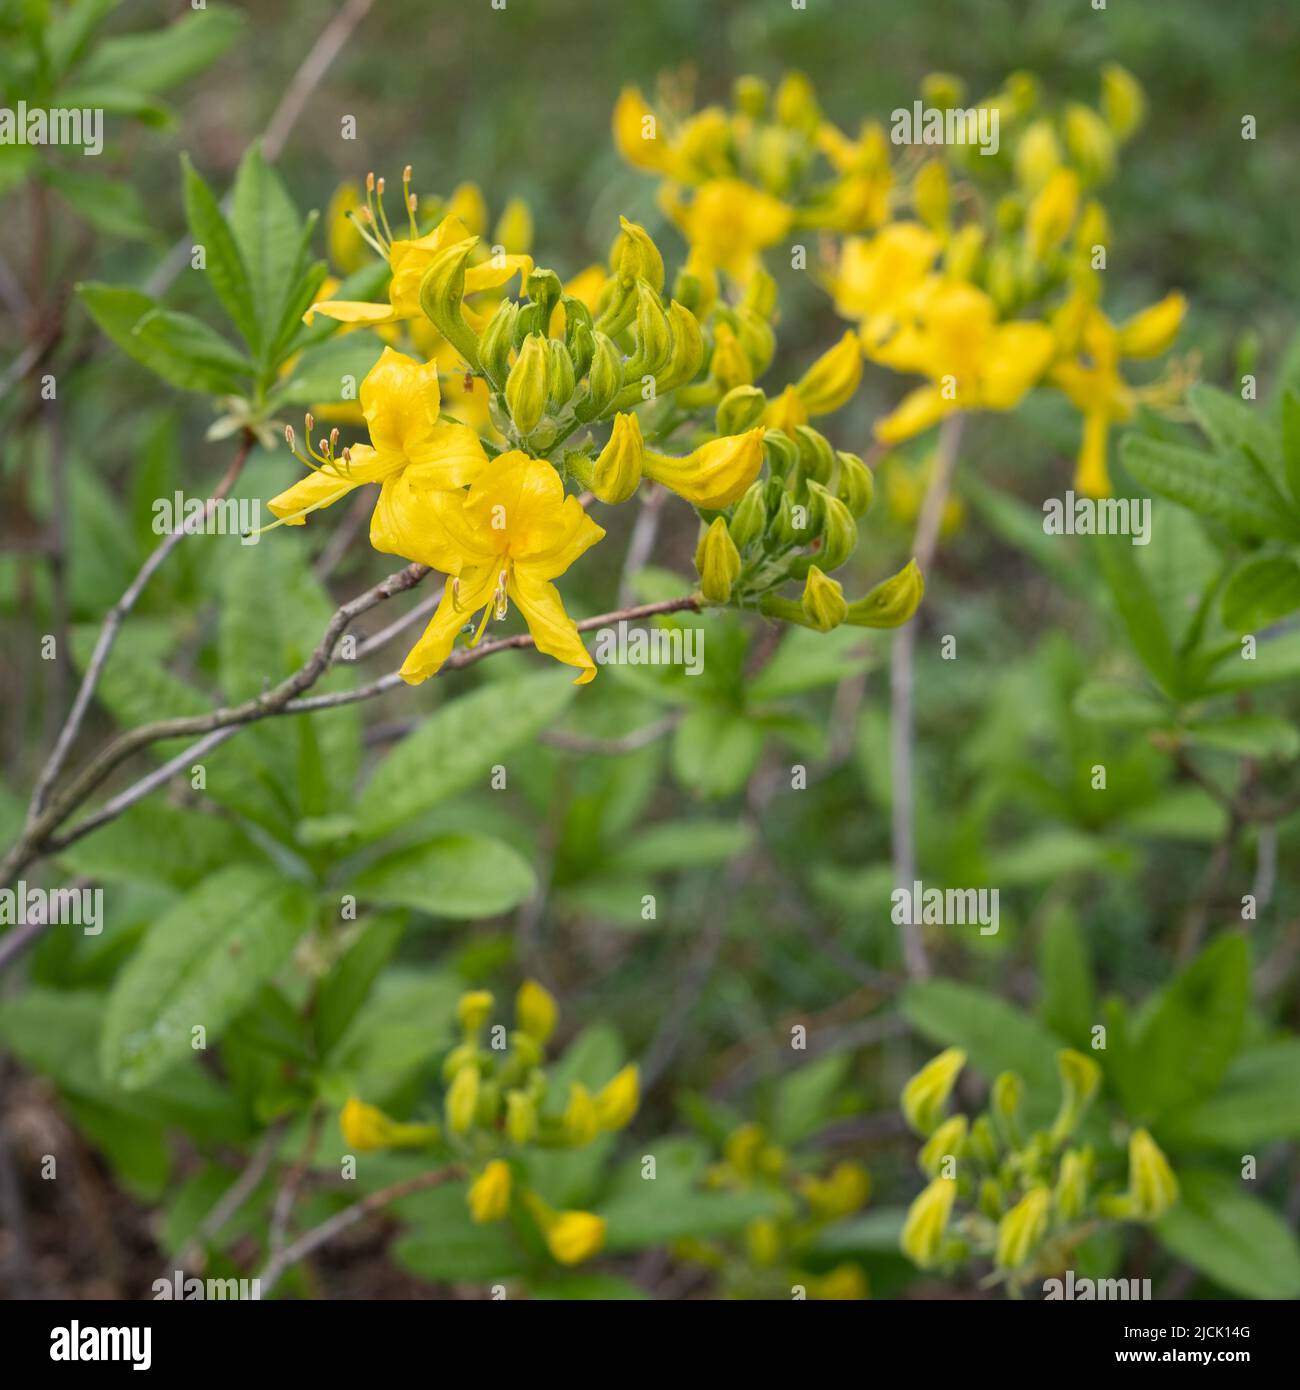 Flowers of blooming yellow rhododendron bush Stock Photo